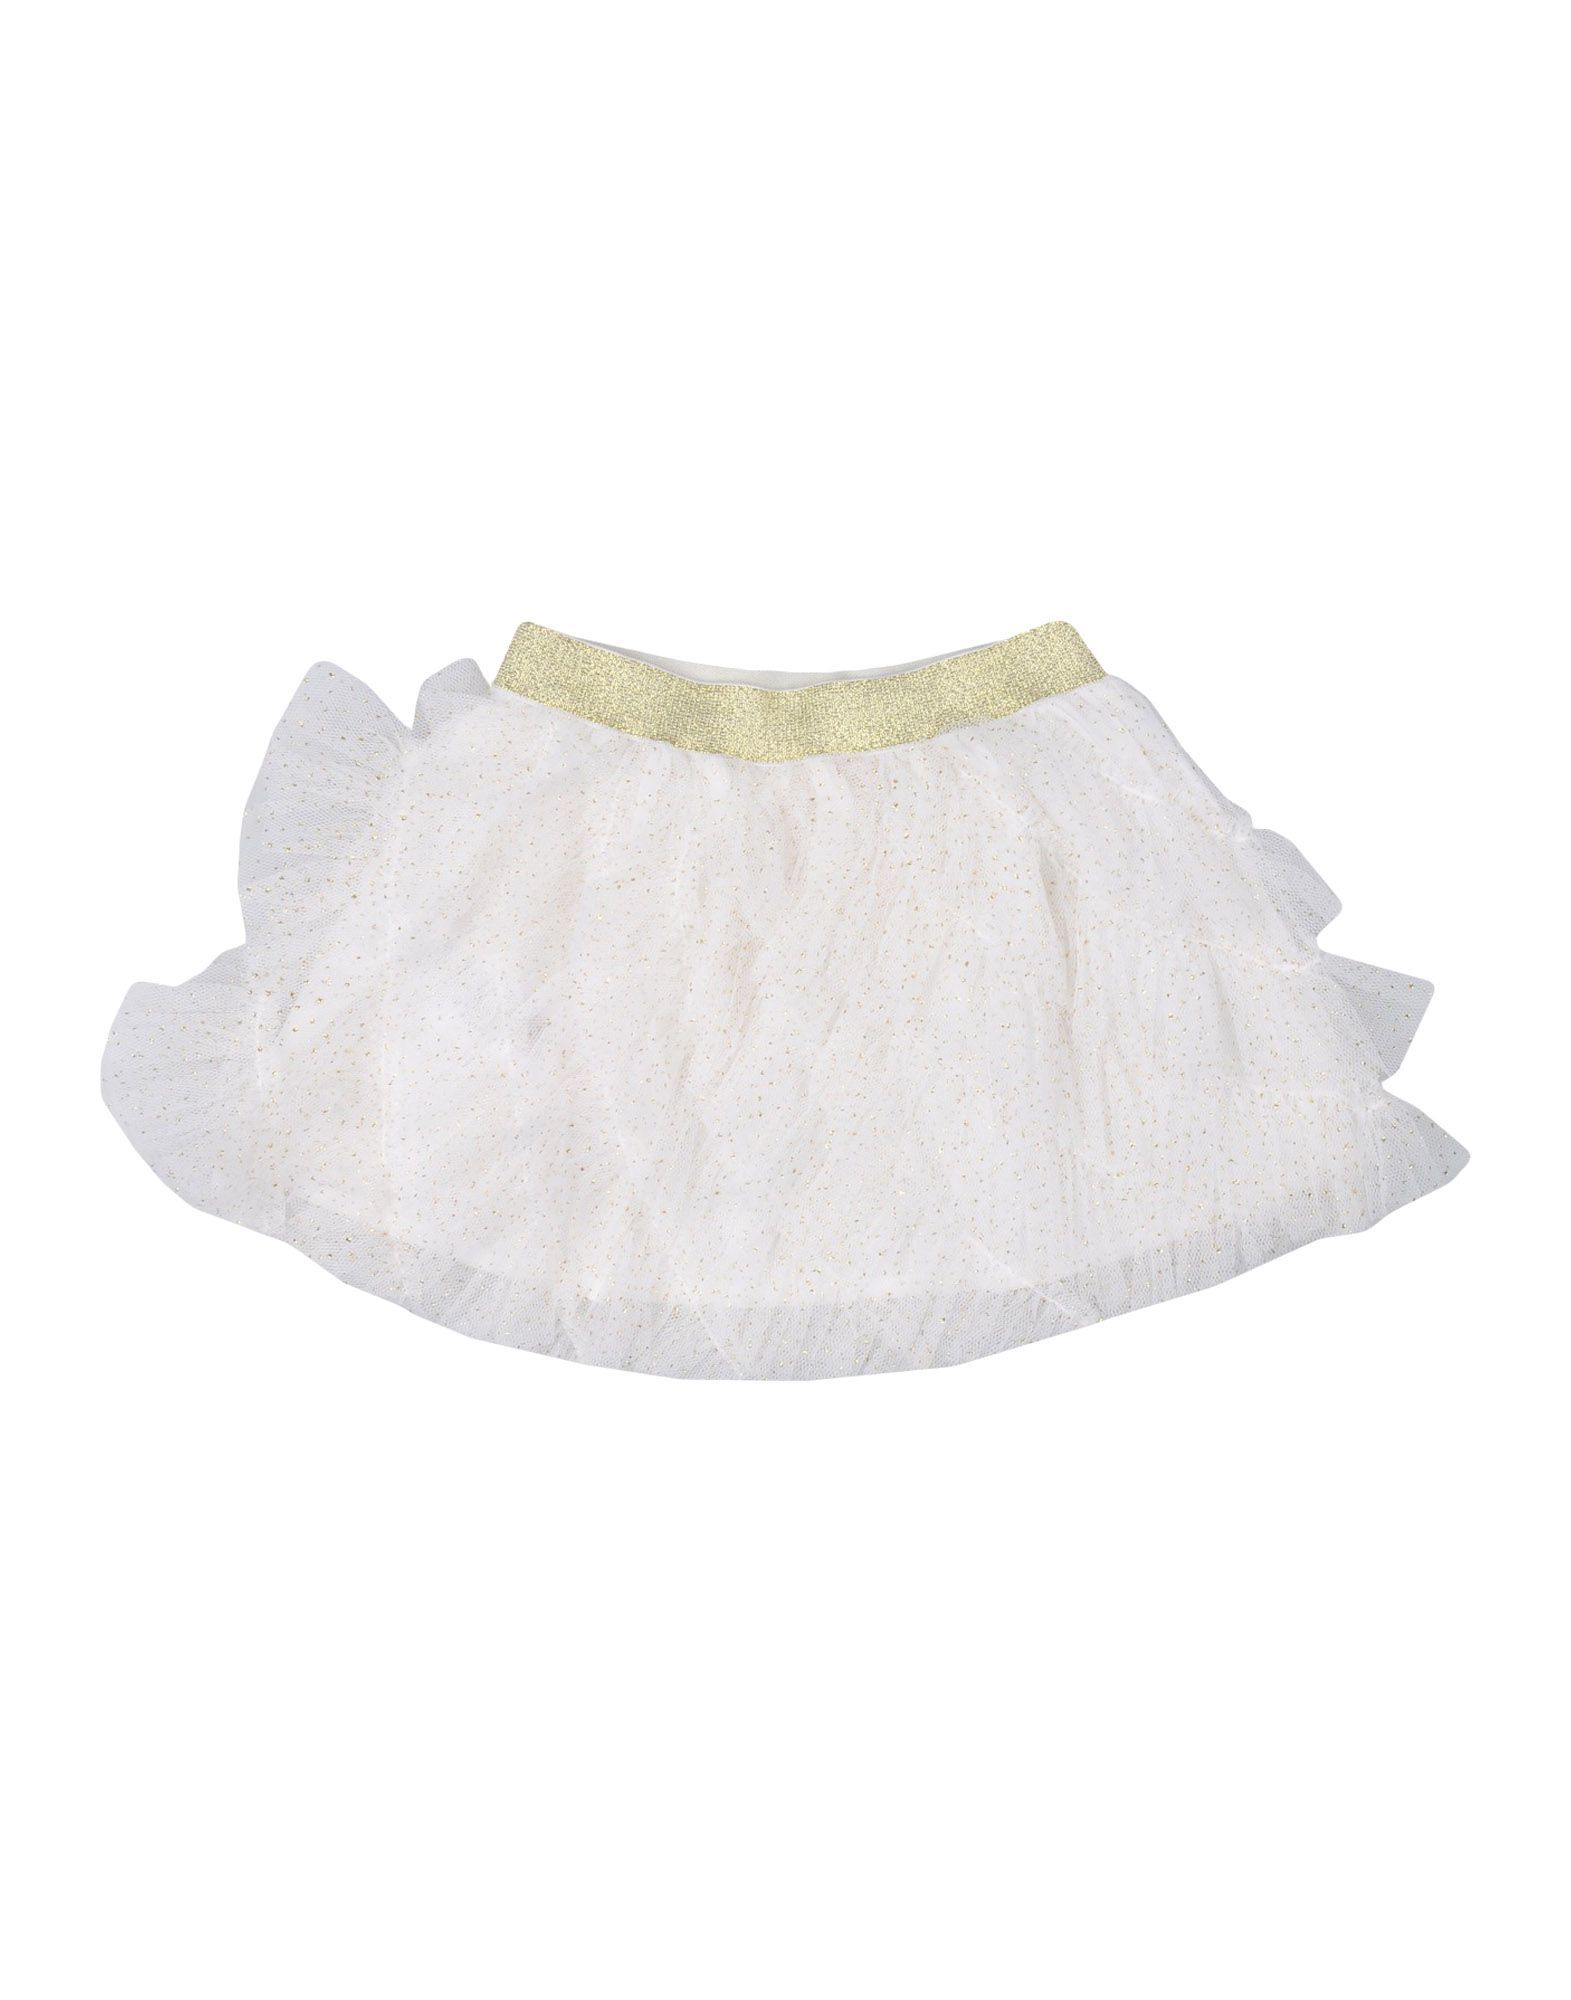 tulle, ruches, glitter, lamé, solid colour, elasticised waist, no pockets, lined interior, wash at 30° c, do not dry clean, iron at 110° c max, do not bleach, do not tumble dry, skirt